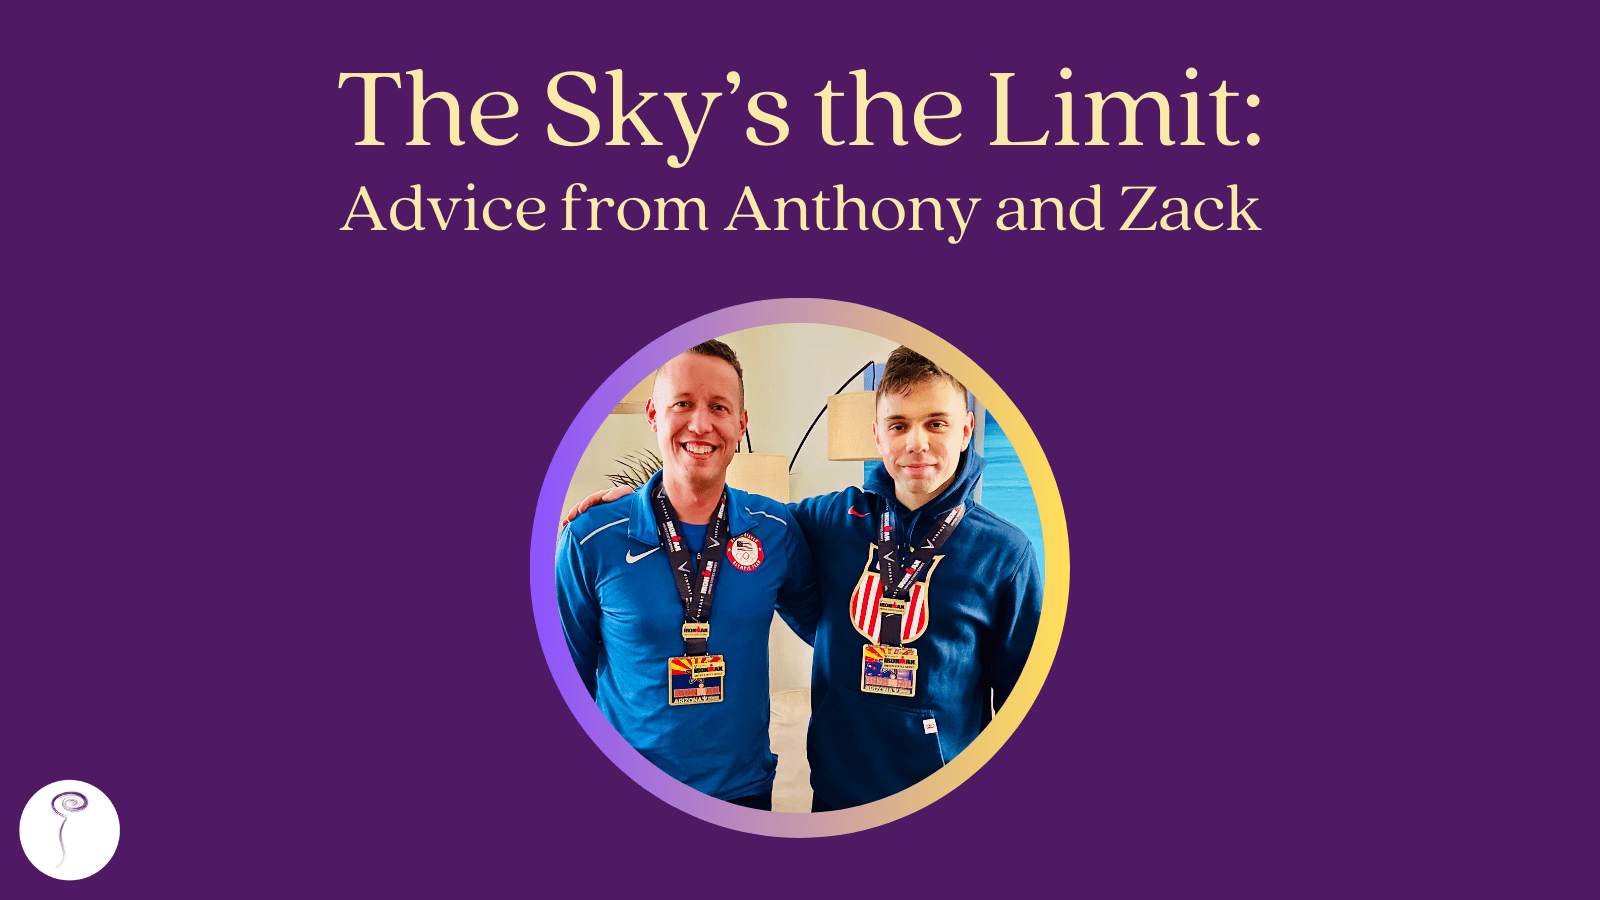 Advice from Anthony and Zack about coping with spinal CSF leak and supporting those who have one